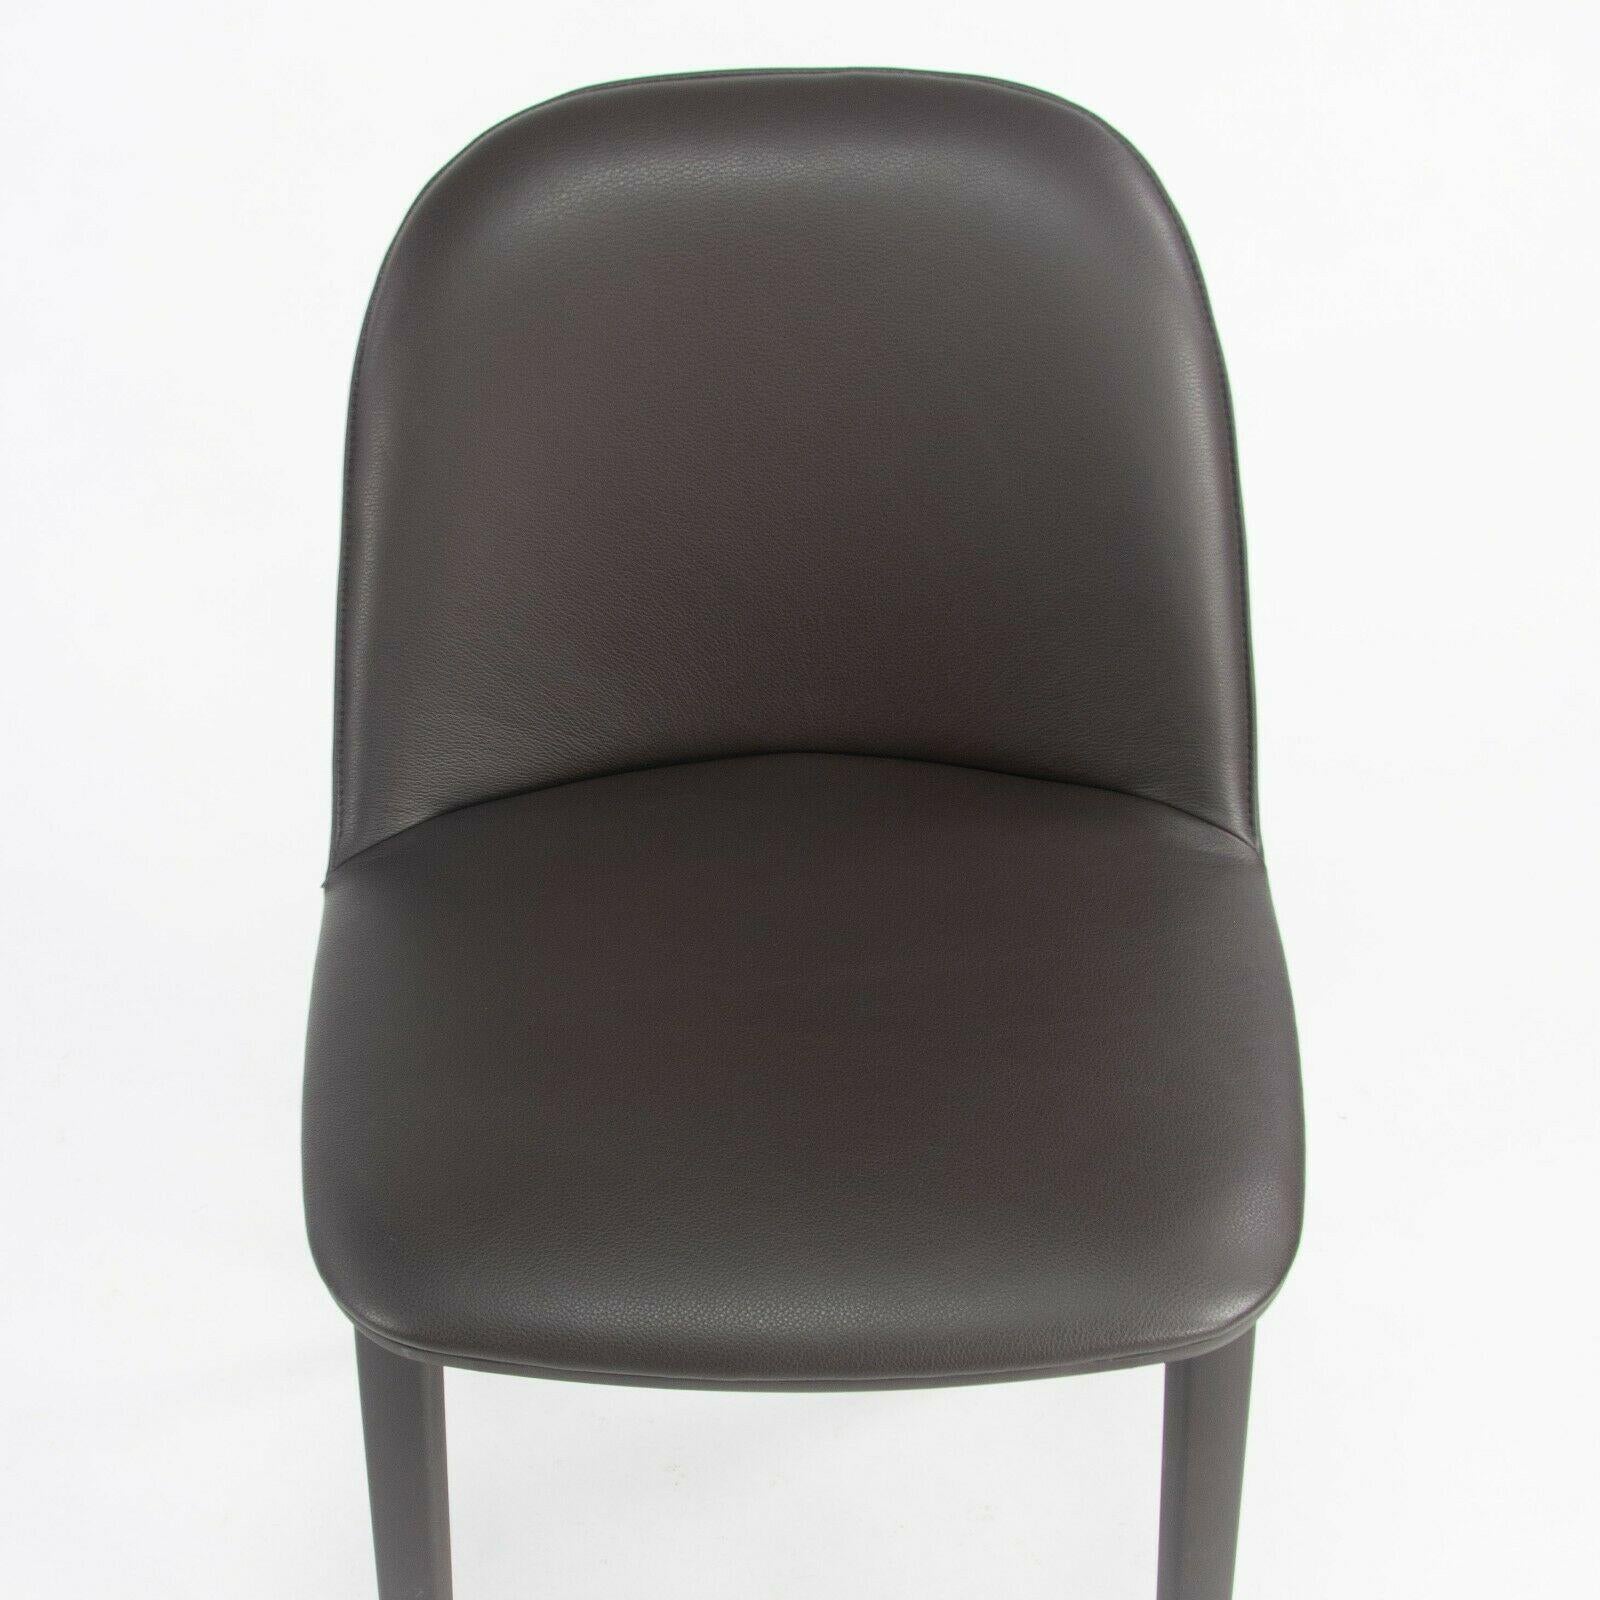 2019 Vitra Softshell Side Chair w Dark Brown Leather by Ronan & Erwan Bouroullec For Sale 6